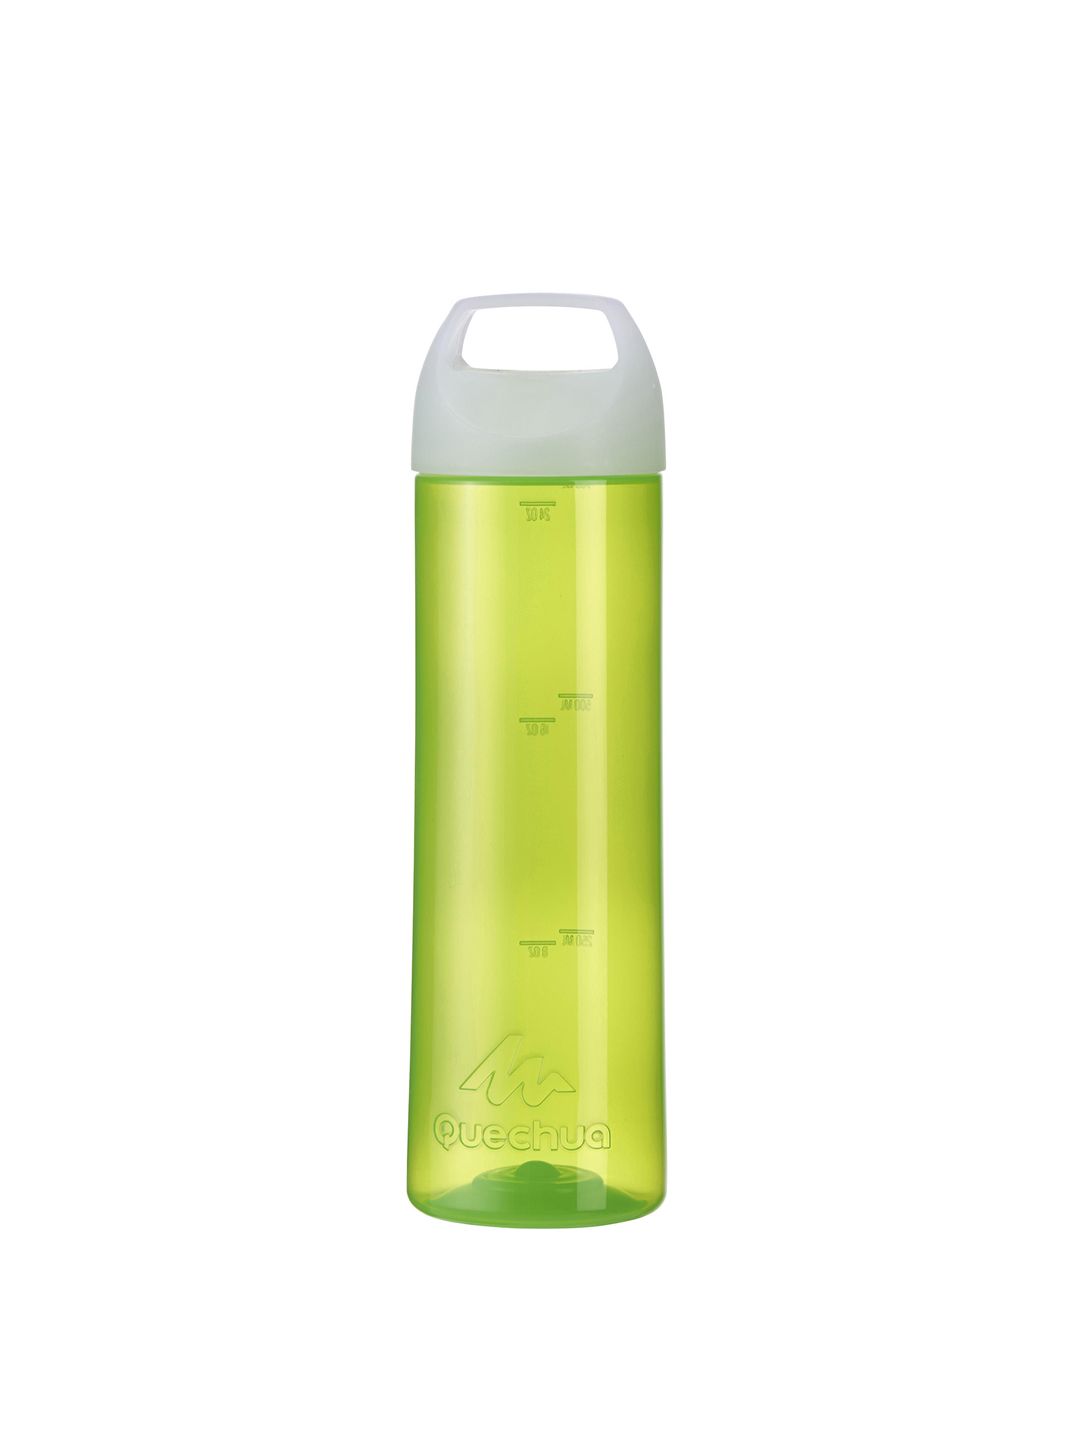 Quechua By Decathlon Unisex Lime Green Solid Lightweight Bottle 0.75 Ltr Price in India